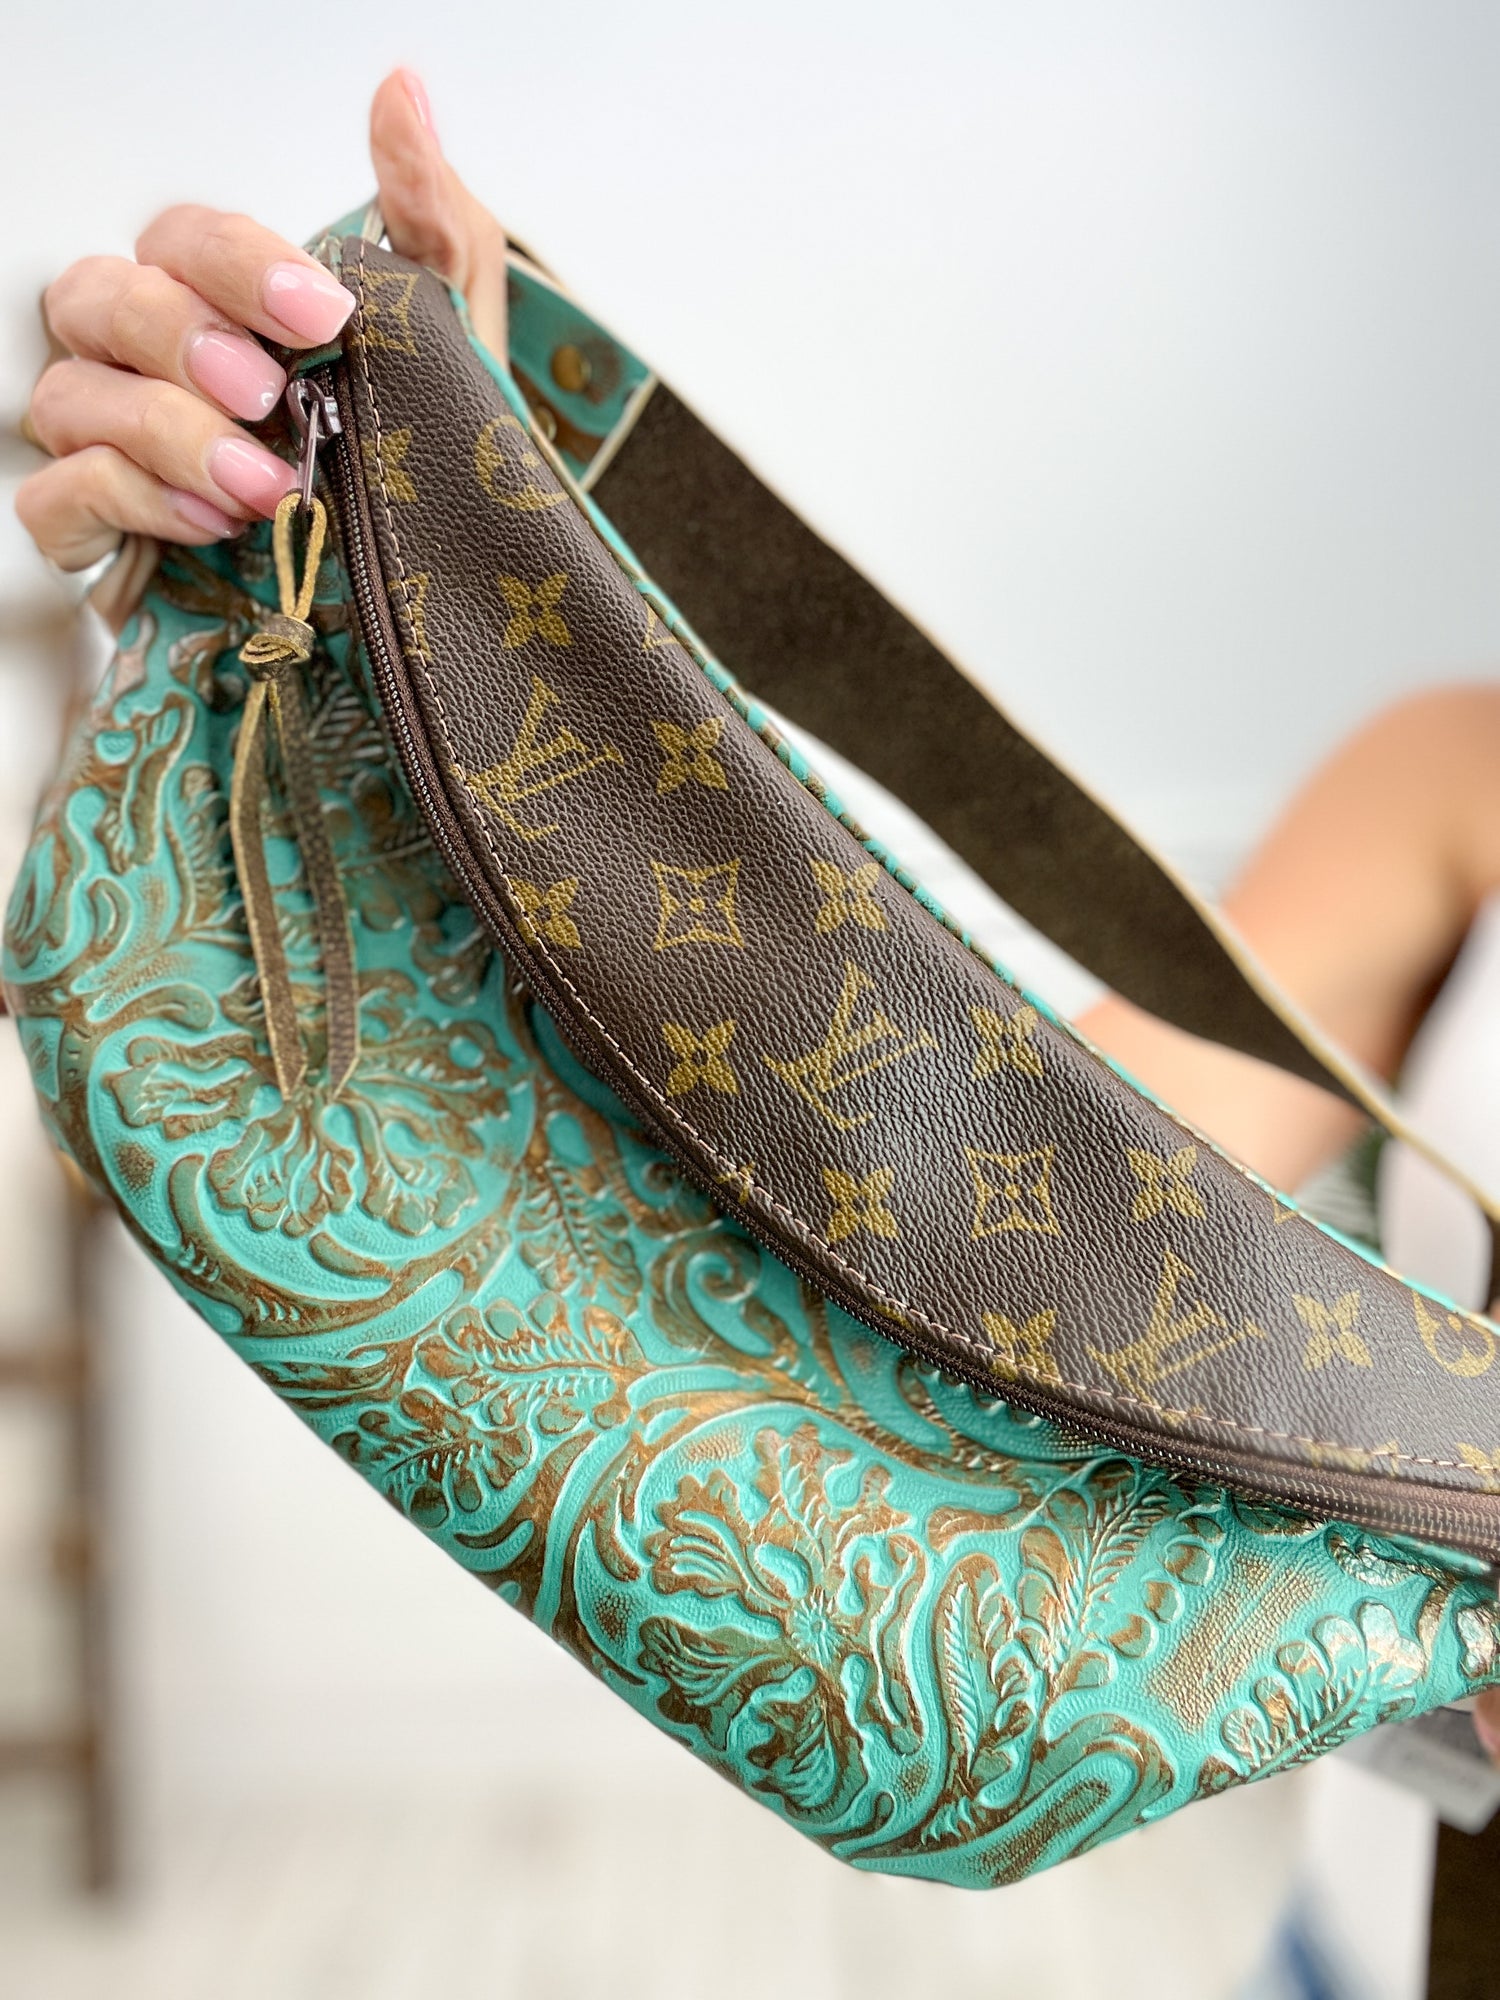 Tulle Turquoise Leather Bum Bag with LV